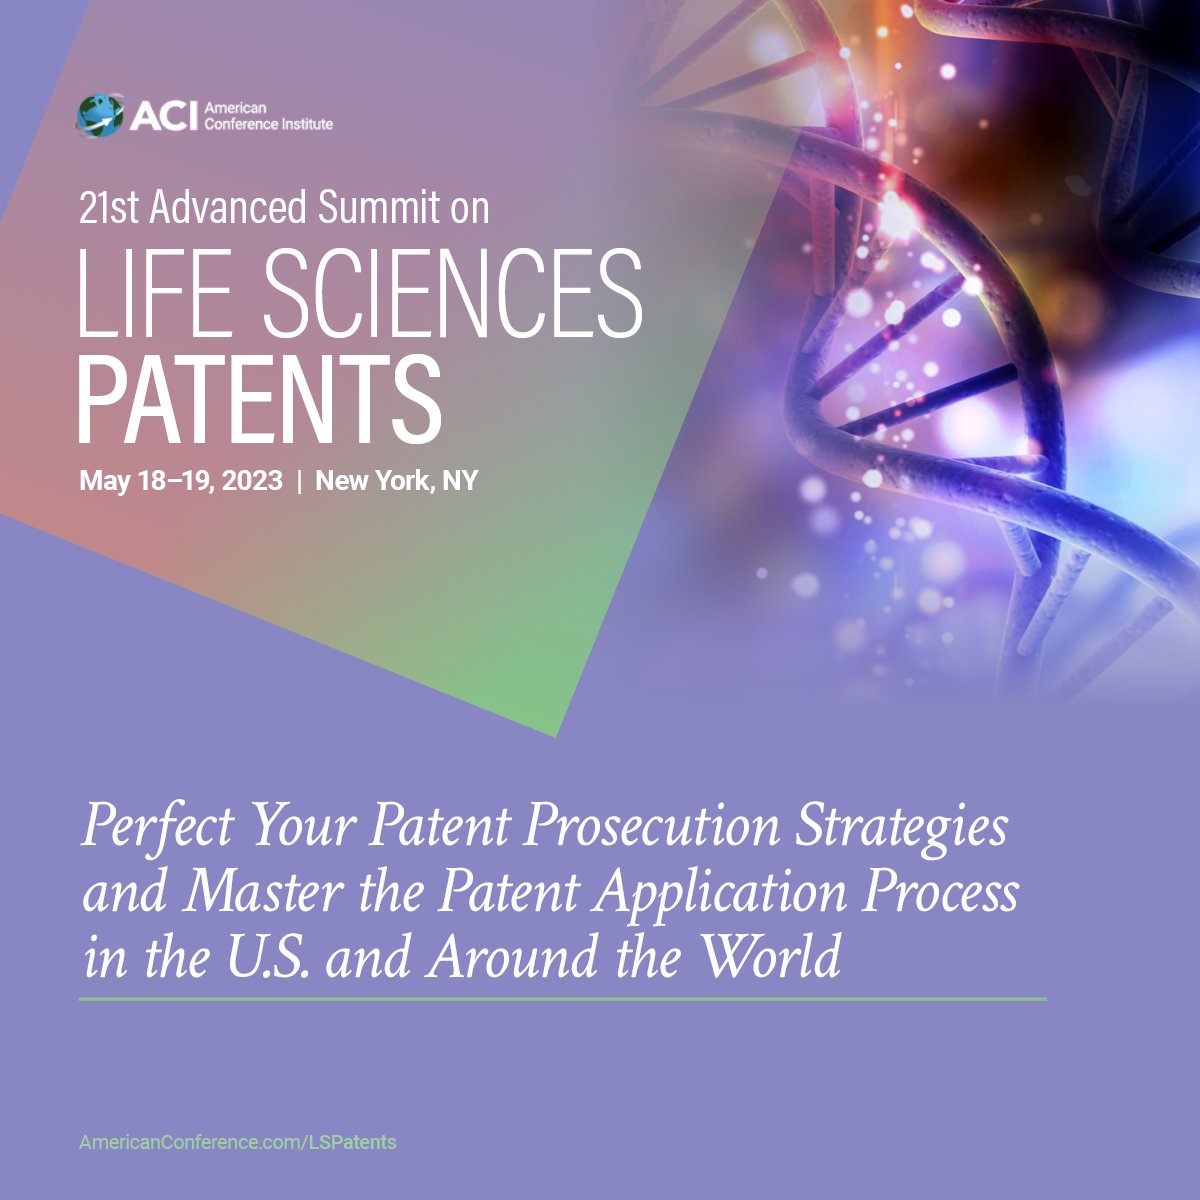 Only 3 more weeks to register for ACI's 21st Advanced Summit on Life Sciences Patents, happening this May at the New York Bar Association. For full session details, visit our conference website: ow.ly/azoV50NYhL7 #ACIConferences #LifeSciencesPatents